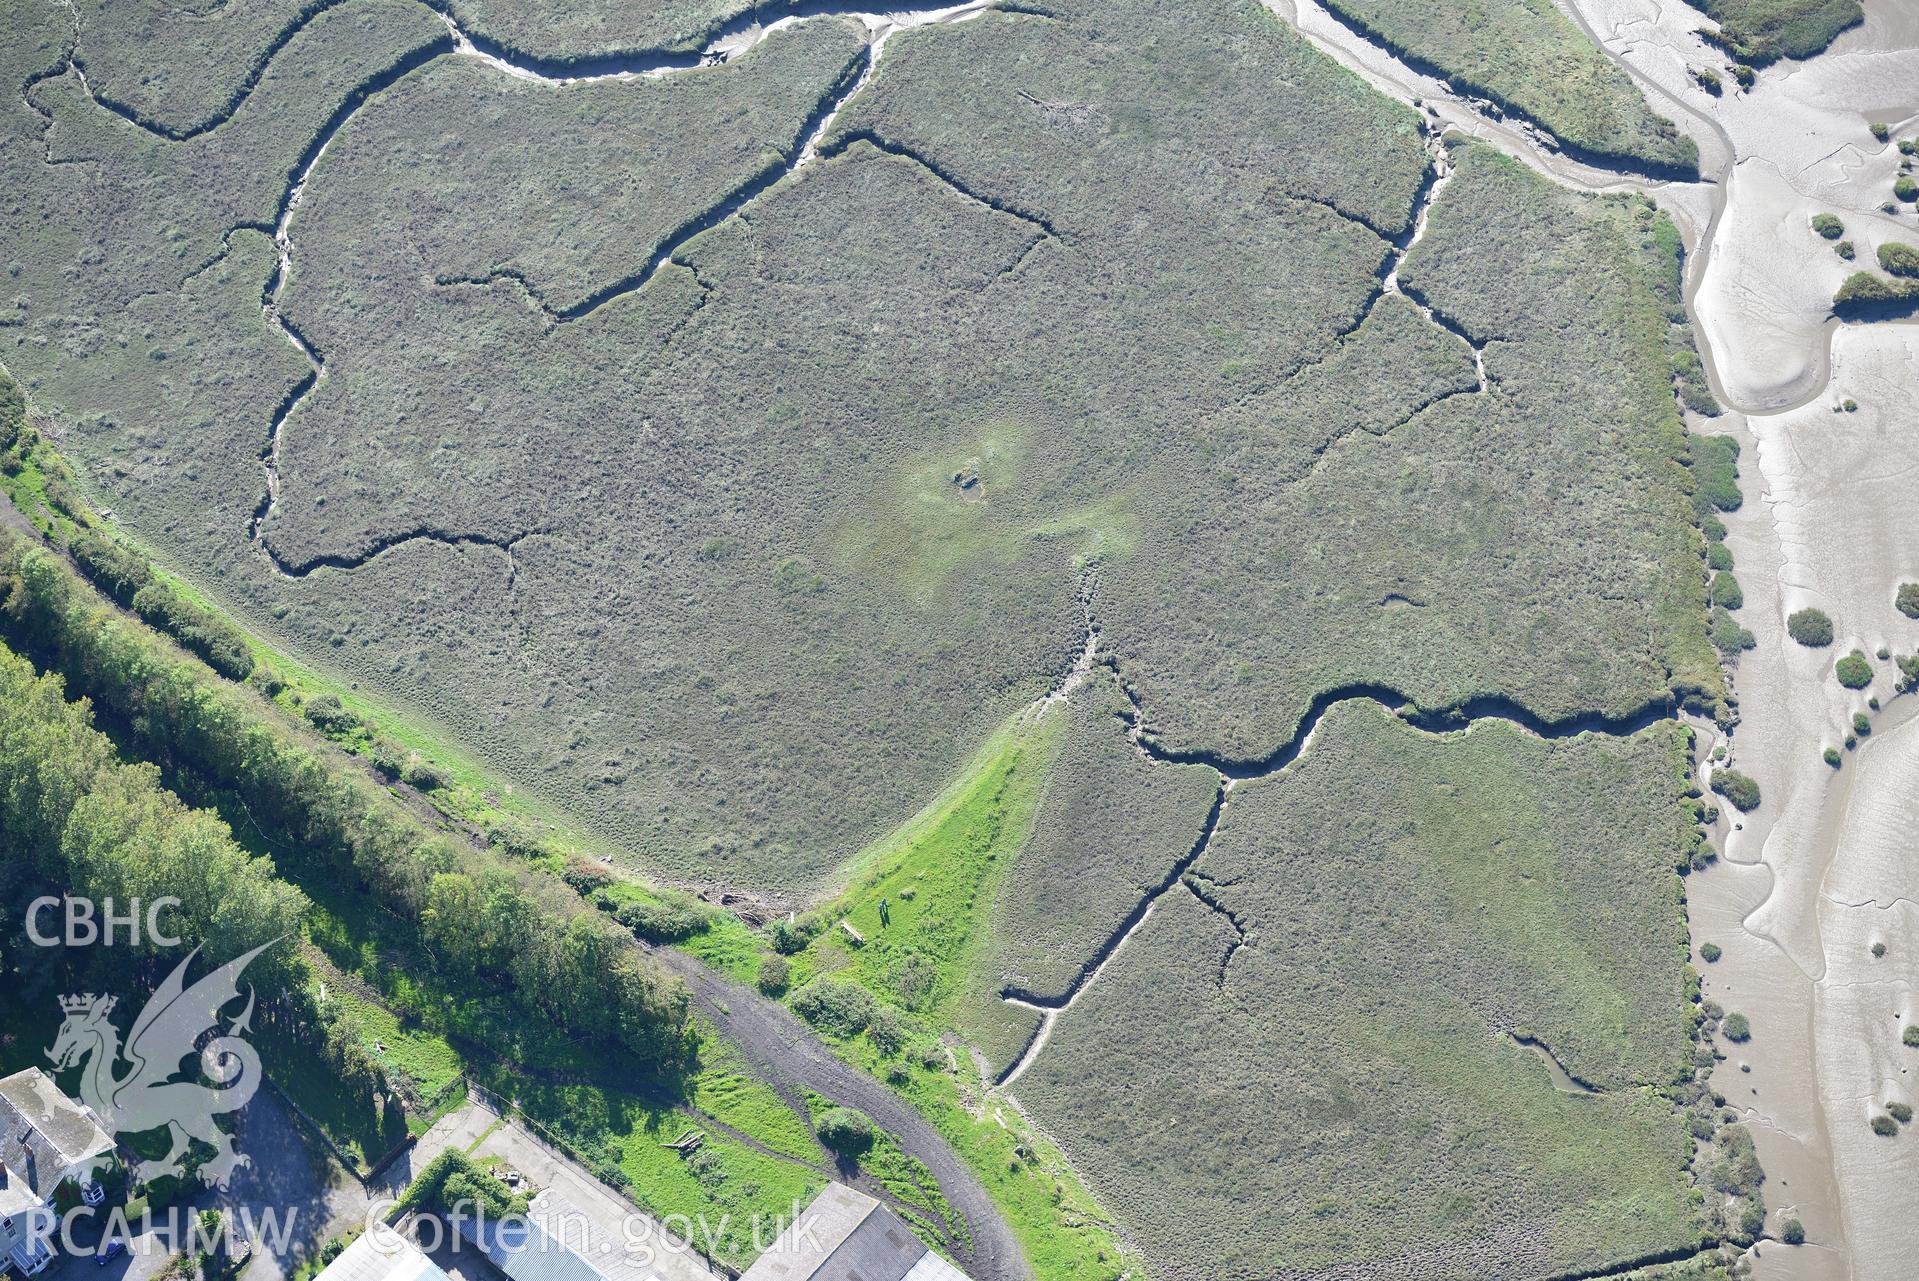 St. Michael's chapel, Llwchwr, east of Llanelli. Oblique aerial photograph taken during the Royal Commission's programme of archaeological aerial reconnaissance by Toby Driver on 30th September 2015.